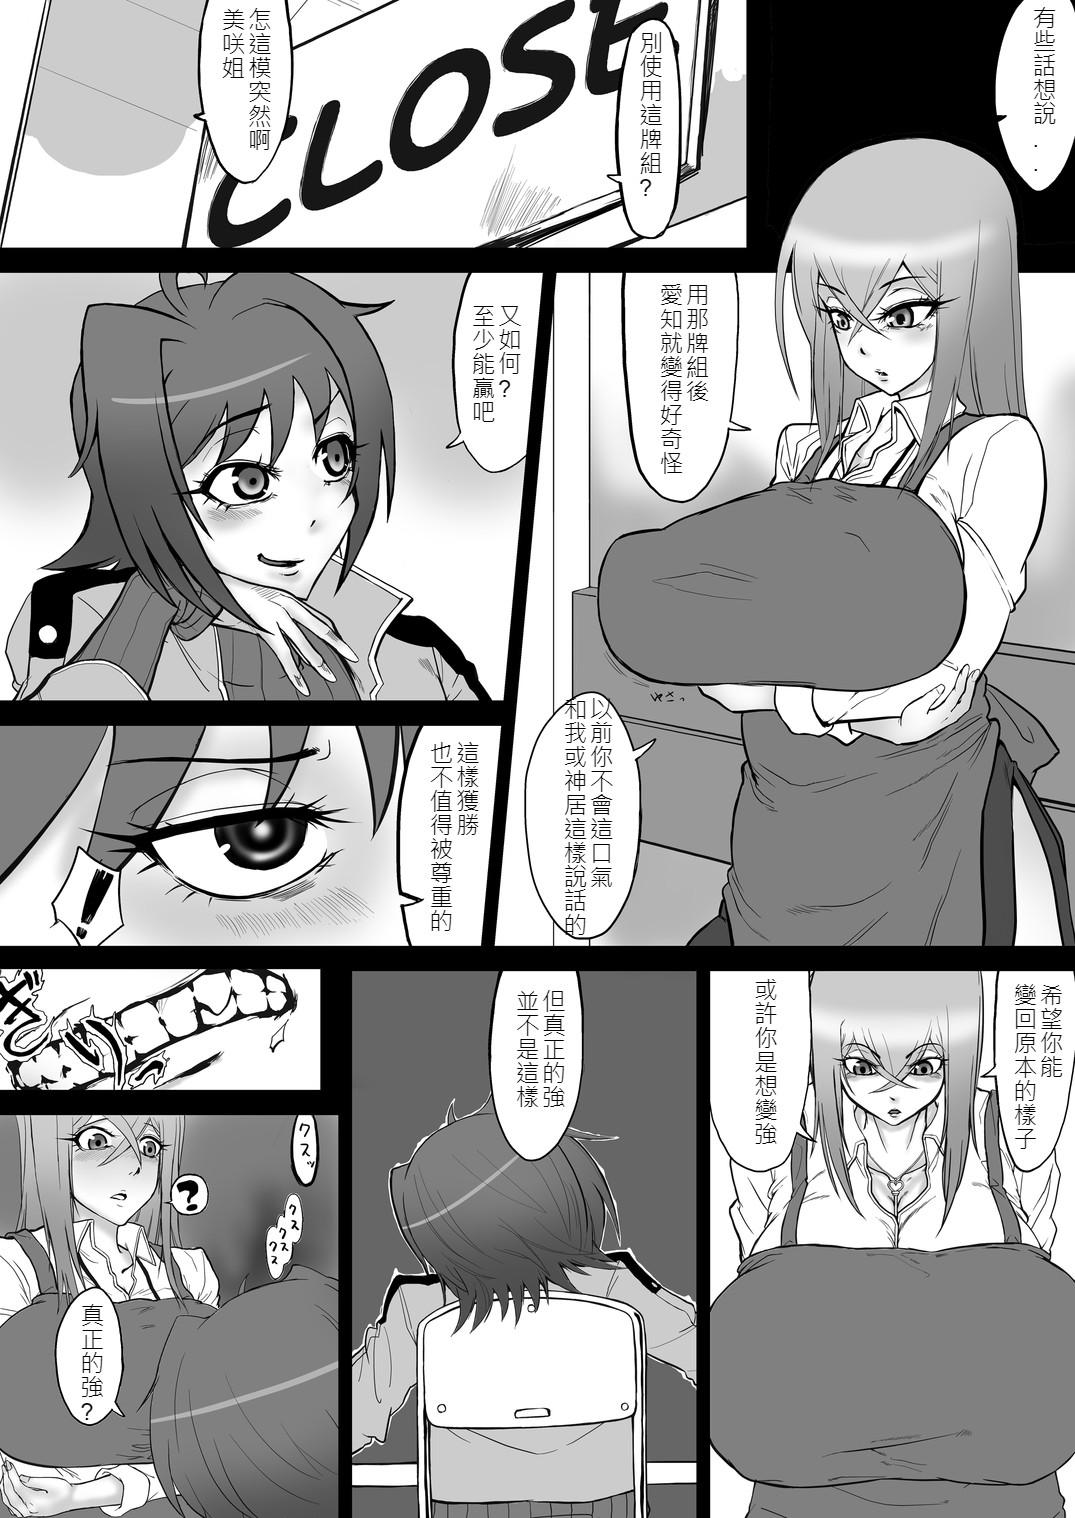 Family Roleplay Bind!! - Cardfight vanguard Amatuer - Page 5